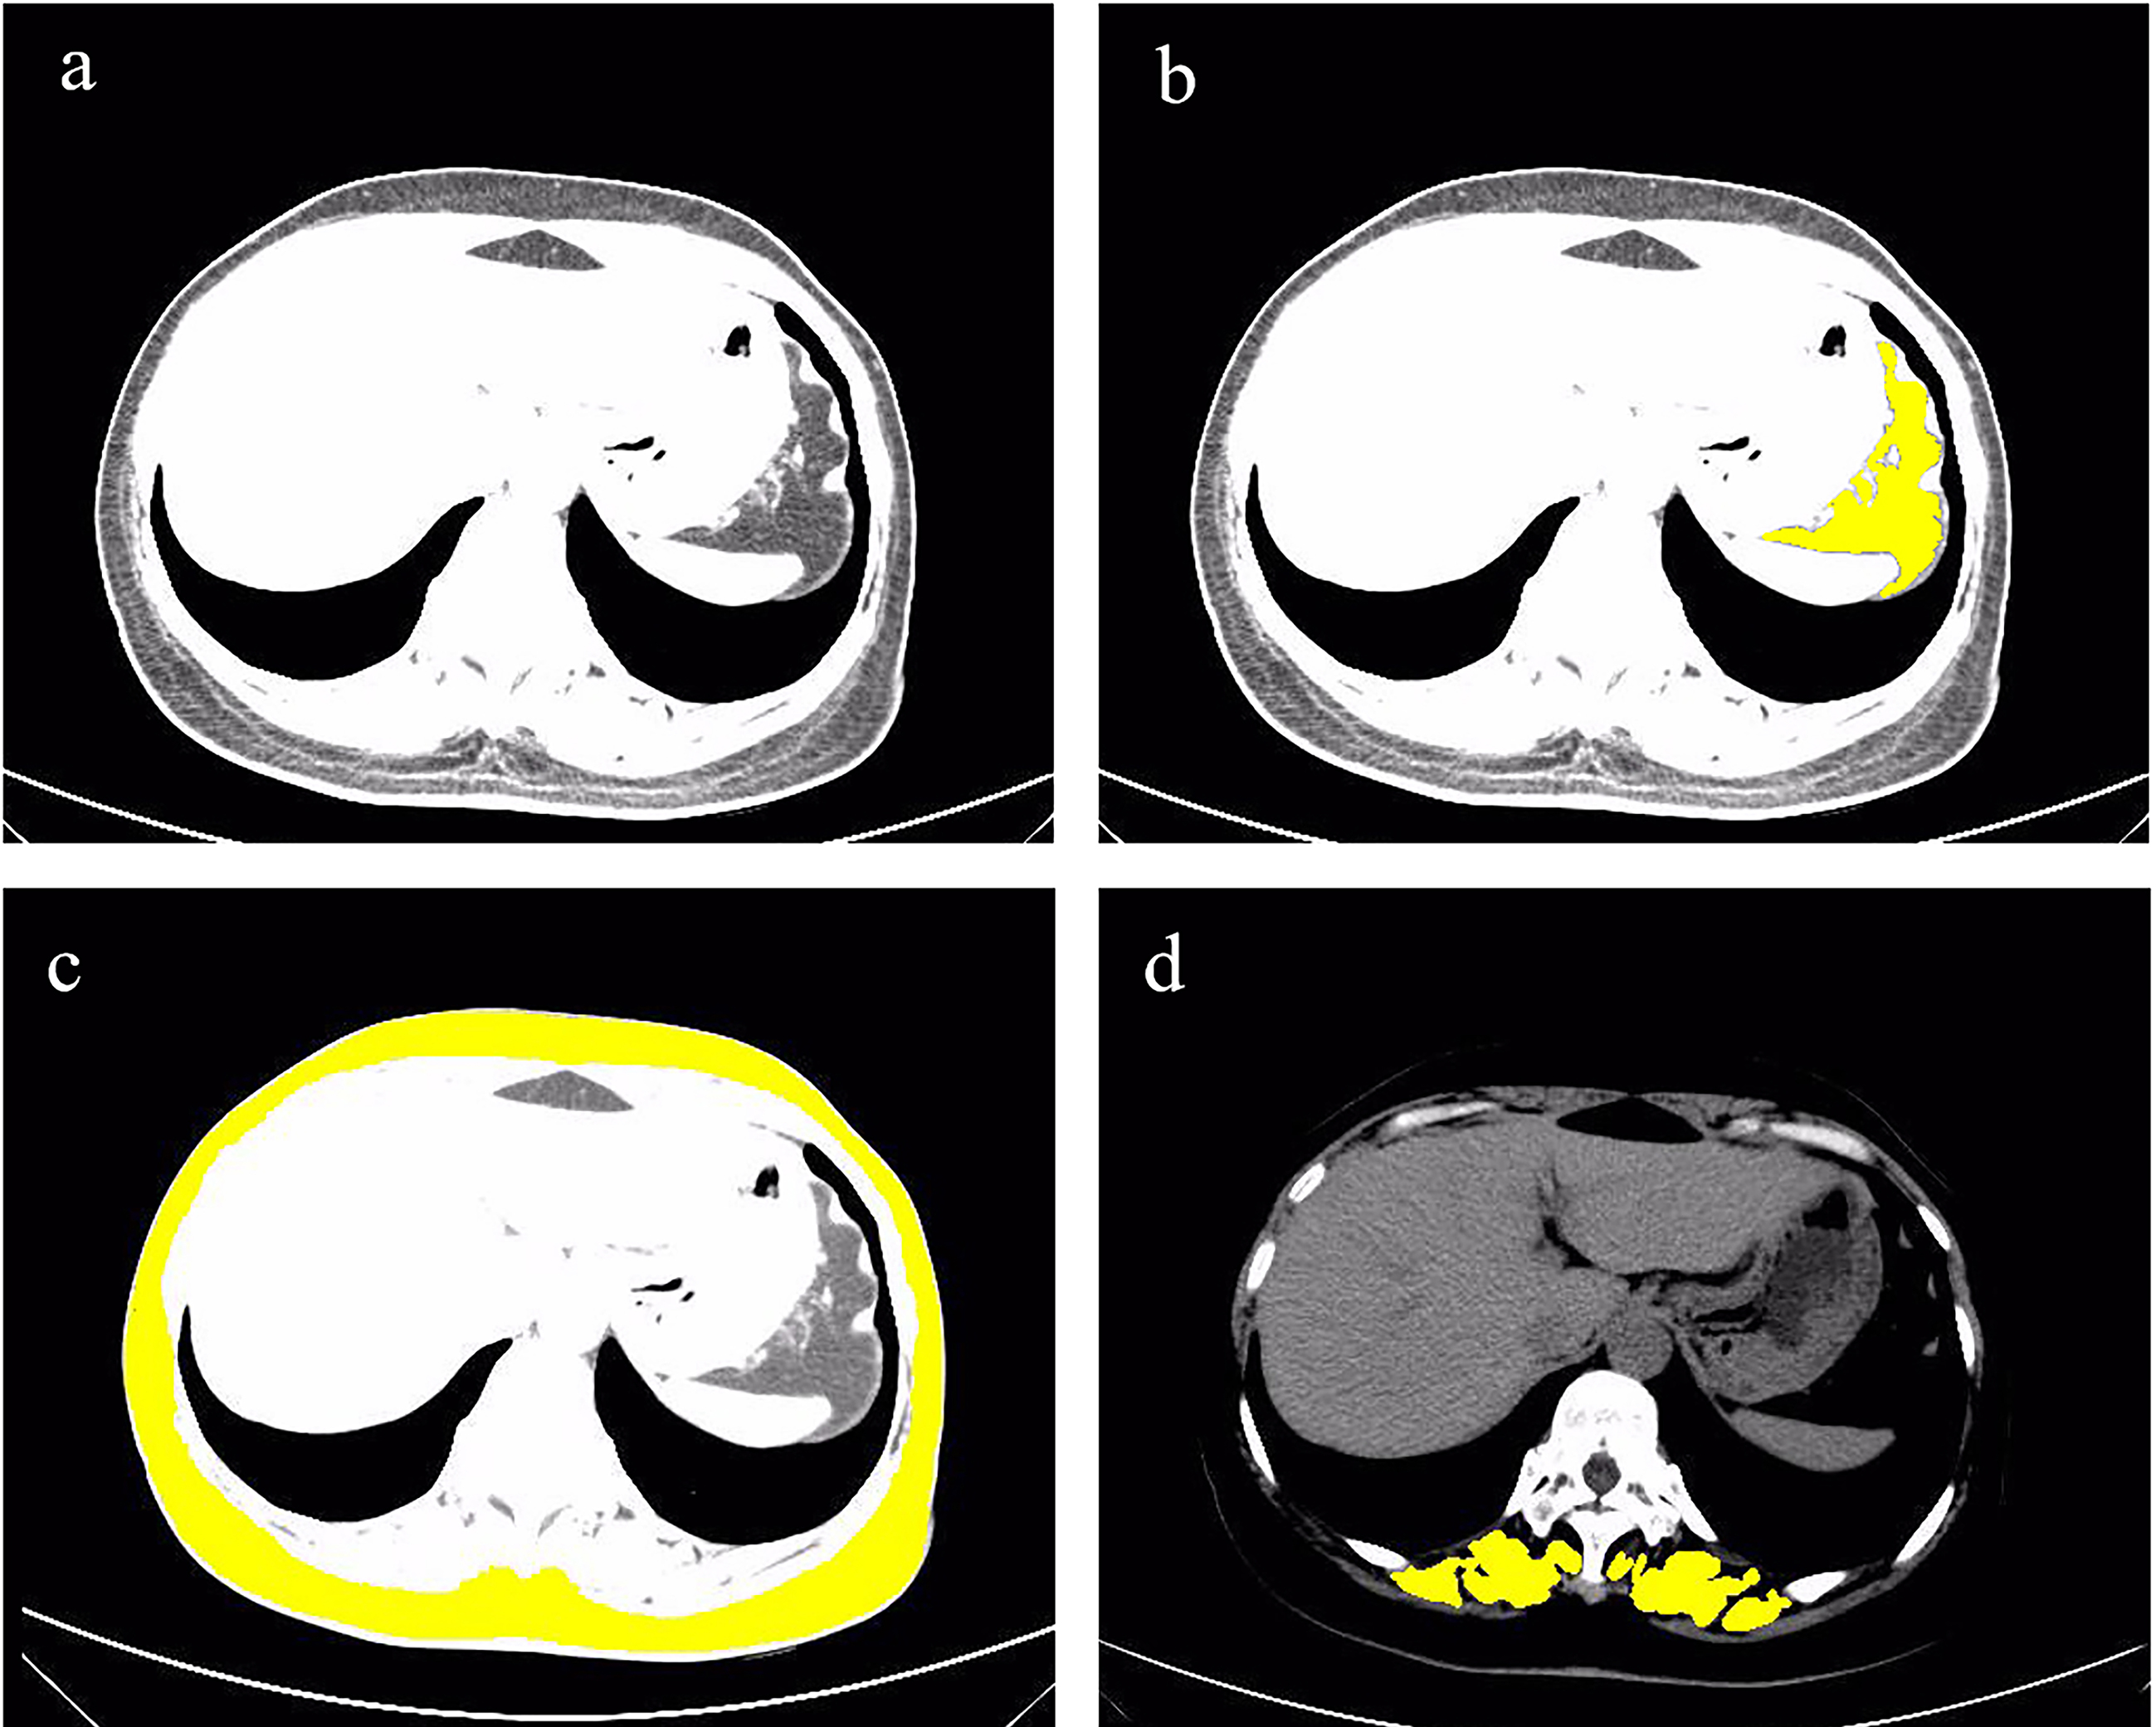 CT image of T11 level, paraspinal muscles, subcutaneous fat and visceral fat. Figure (a) is the CT image of the T11 level. The yellow area in Figure (b) is the visceral fat in the T11 level CT image. The yellow area in (c) is the subcutaneous fat in the T11 level CT image. The yellow area in (d) is the paraspinal muscles in the T11 level CT image.